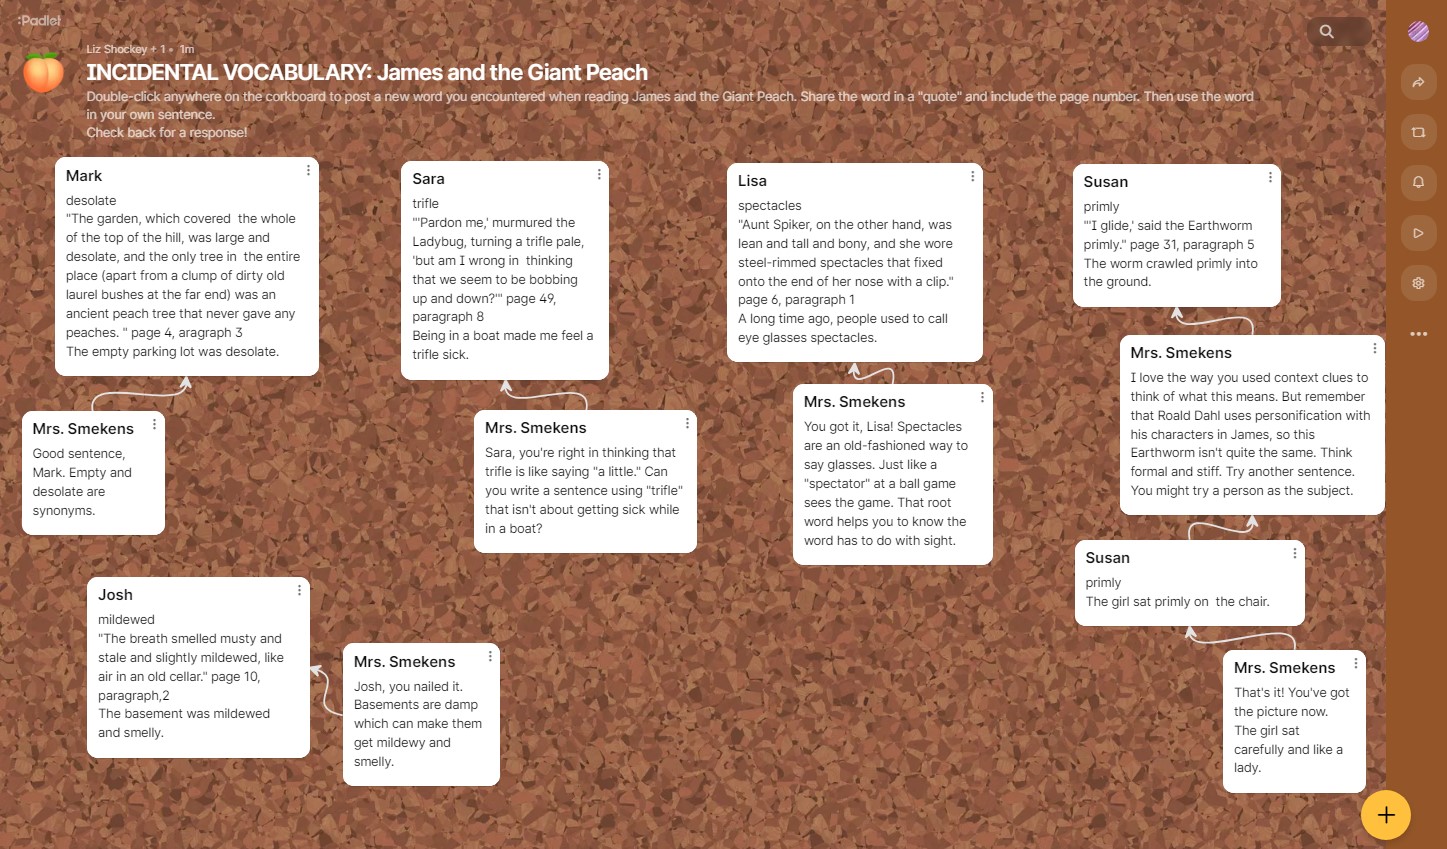 Padlet Example - Incidental Vocabulary from James and the Giant Peach